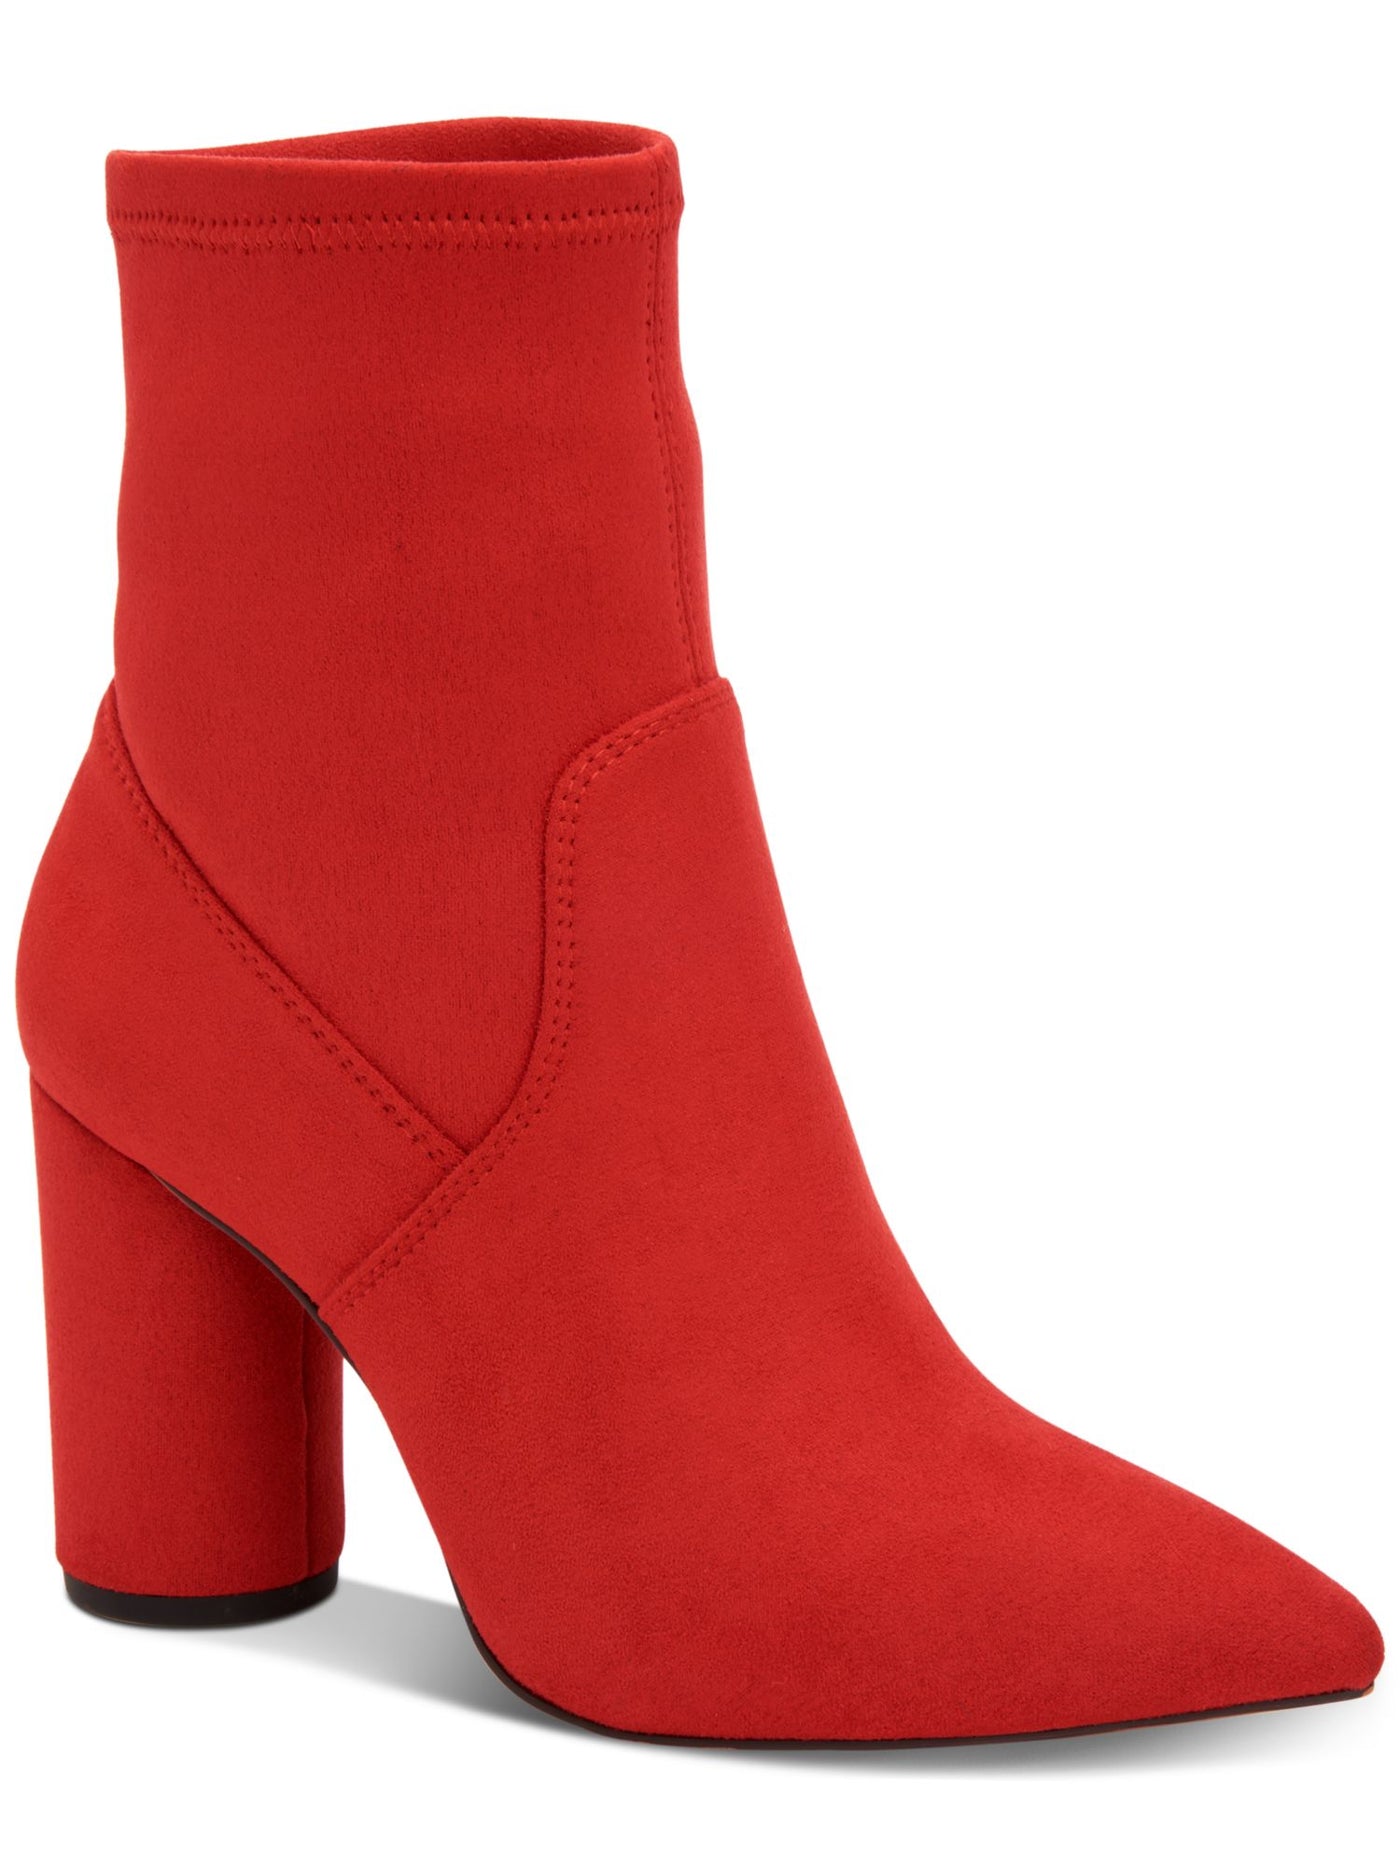 BCBGENERATION Womens Red Cushioned Breathable Ally Pointed Toe Sculpted Heel Zip-Up Dress Booties 9.5 M